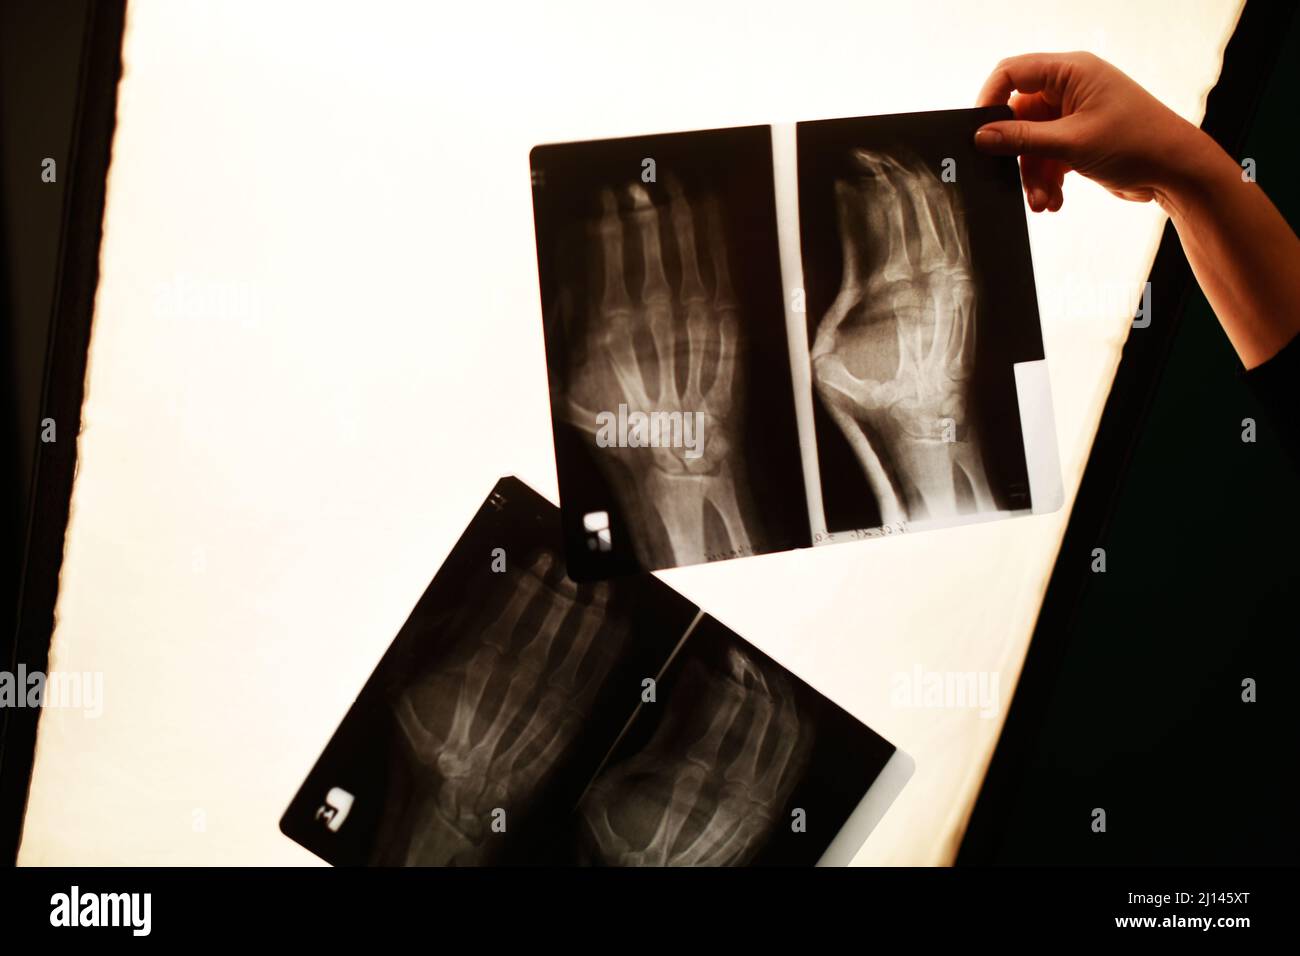 The nurse's hand is holding a x-ray photo of the arm. Arm fracture, medicine. Stock Photo